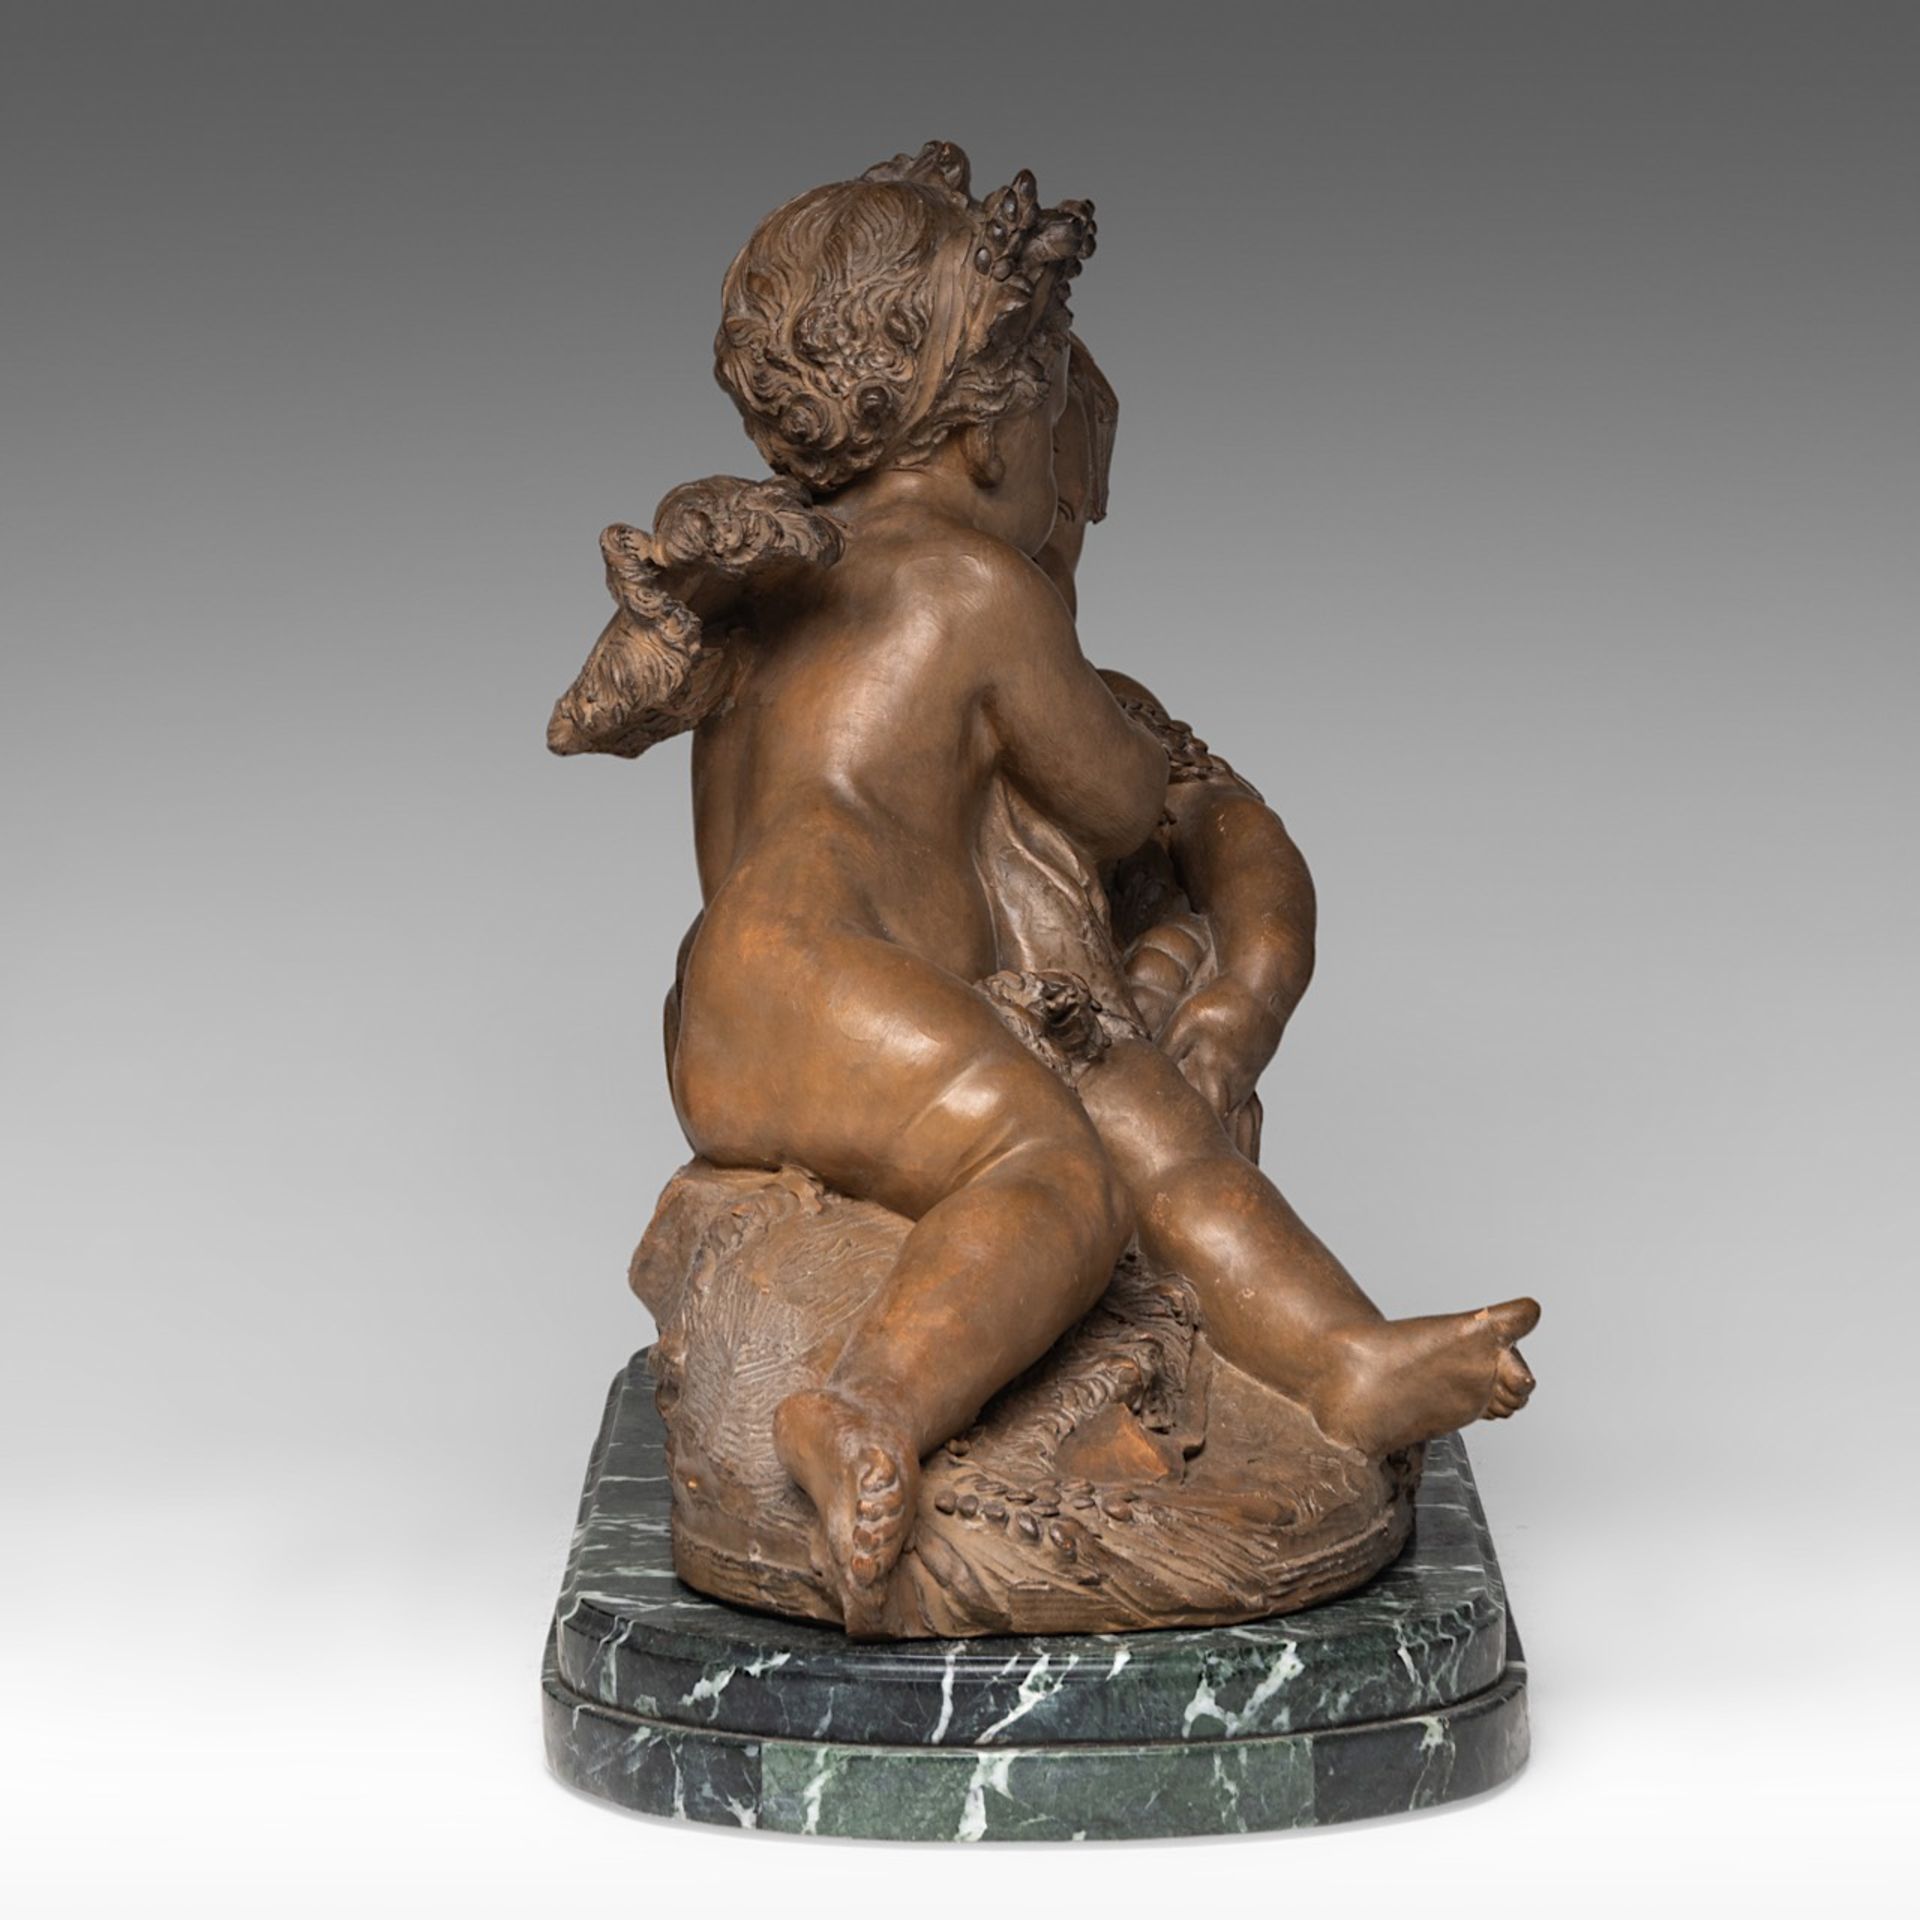 Carrier-Belleuse (1824-1887), two putti by the fountain, terracotta on a marble base, H 43 - W 68 cm - Image 7 of 10